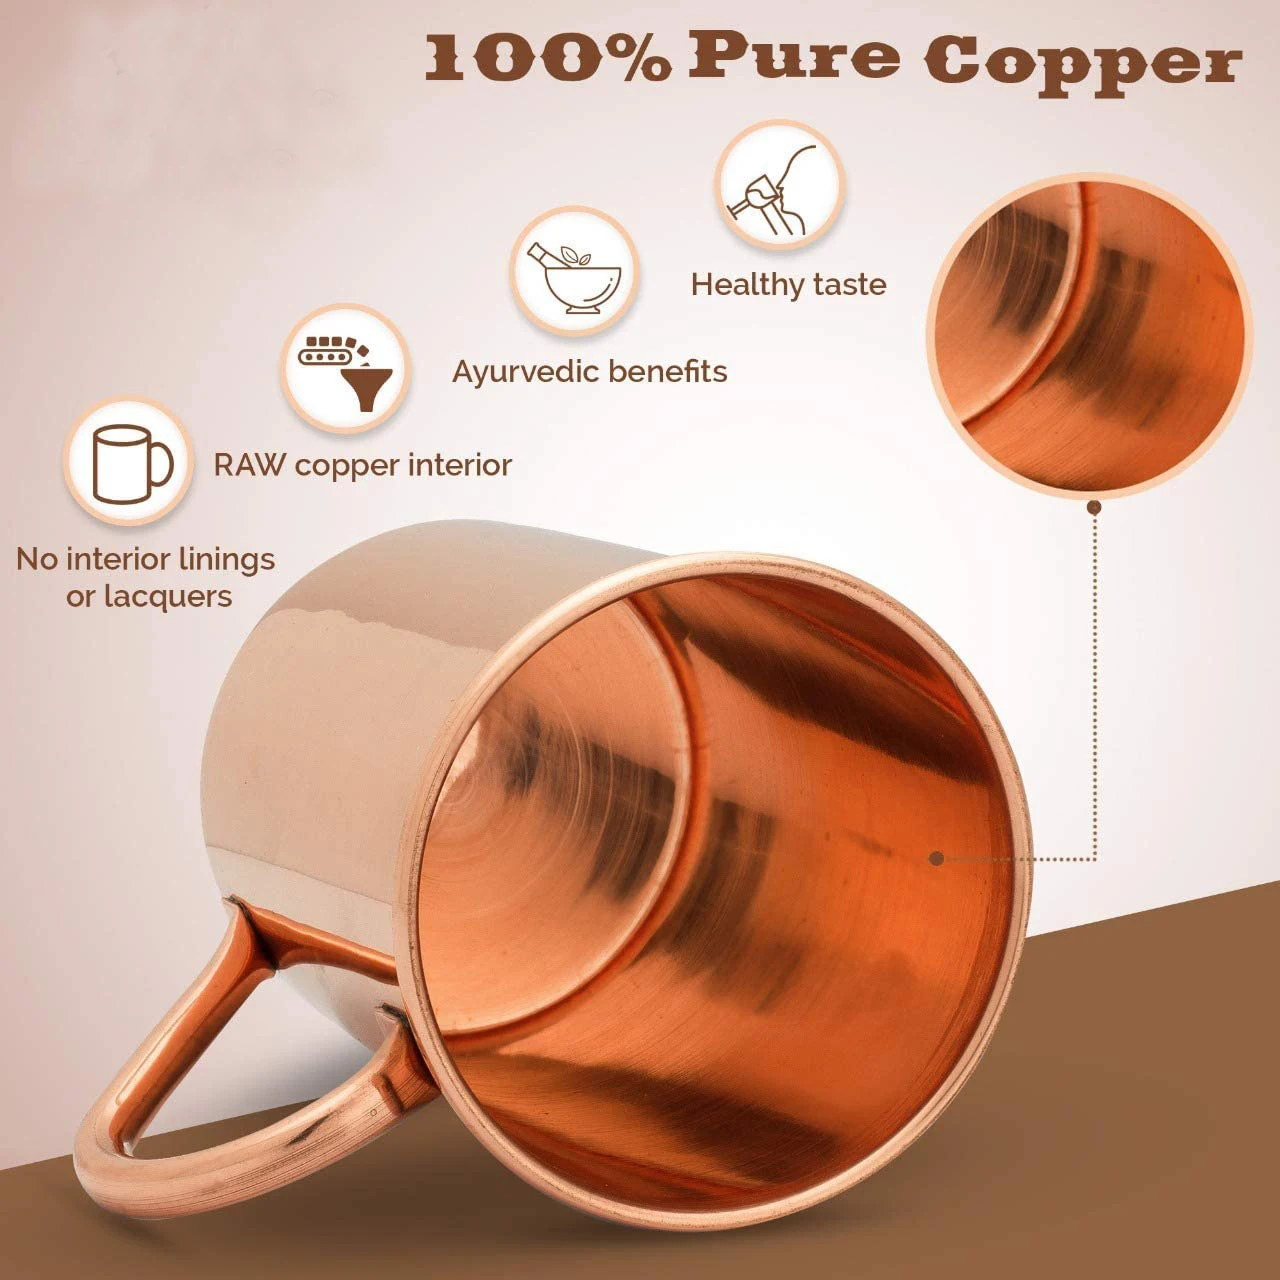 Moscow Mule PURE Copper Mugs-Cylinder-Shaped 100% Copper Cups Pure Solid 16 oz Copper Cocktail Cups Copper Beer Mug